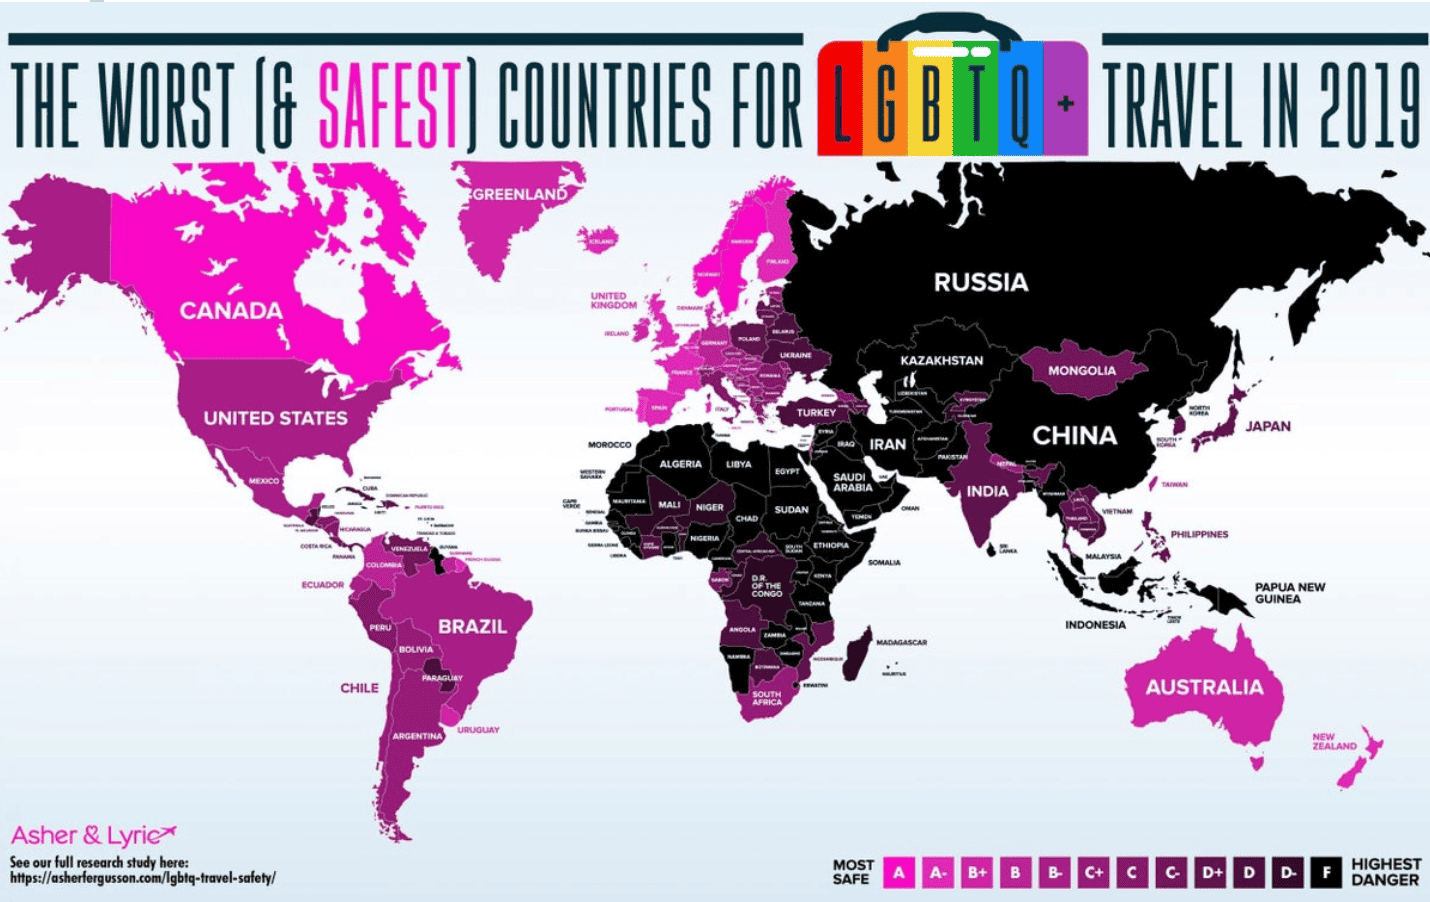 Graphic illustrating safest countries for LGBTQ+ travel in 2019.